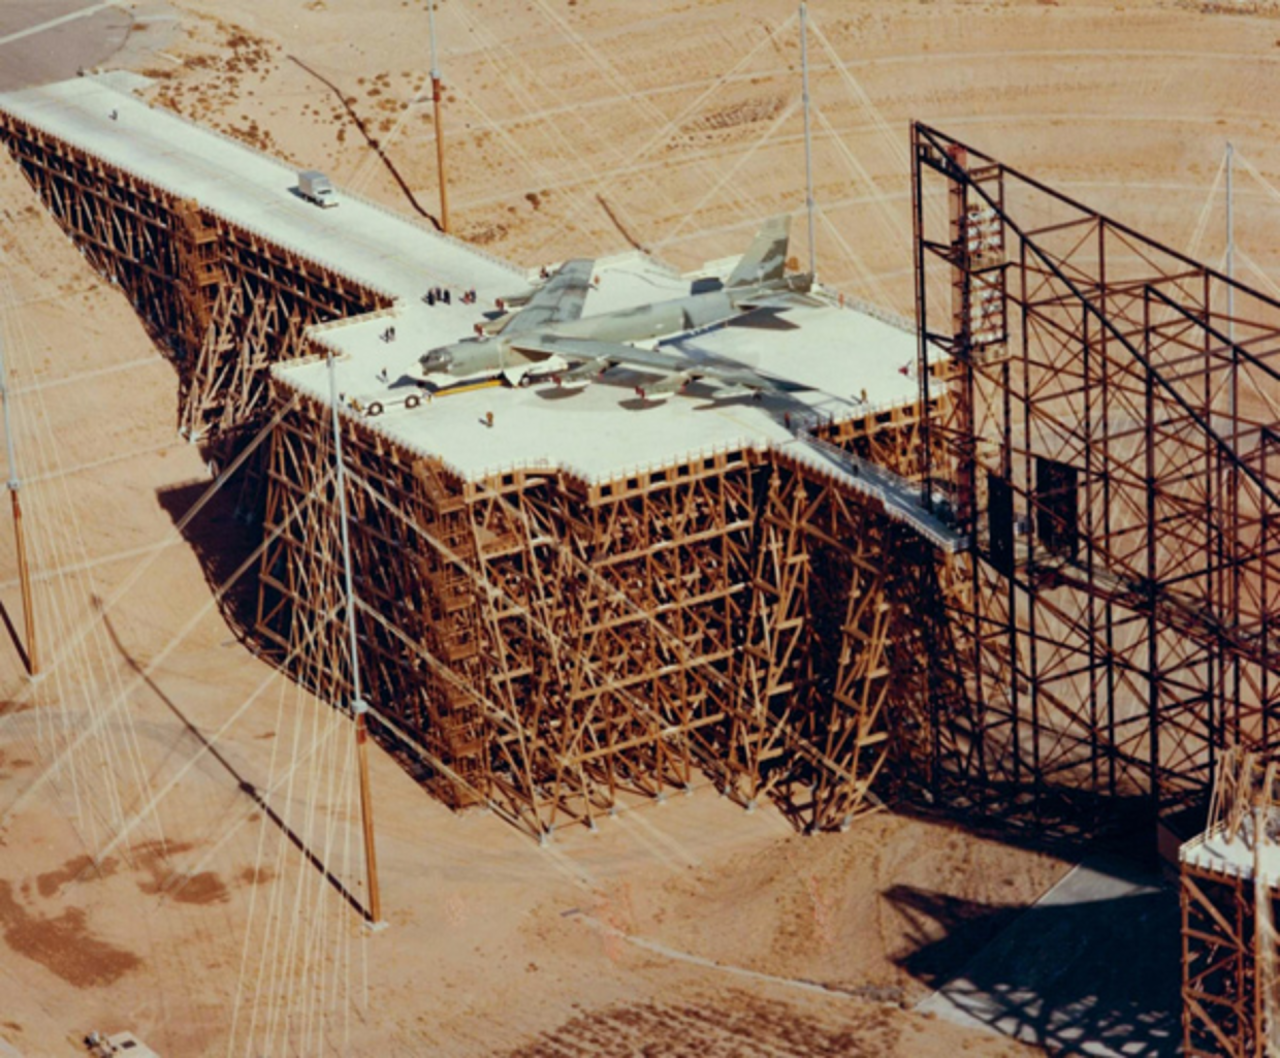 The ATLAS-I (Air Force Weapons Lab Transmission-Line Aircraft Simulator) test facility with a Boeing B-52 in test position.
Better known as Trestle, it was the codename for a unique electromagnetic pulse (EMP) generation and testing apparatus built...